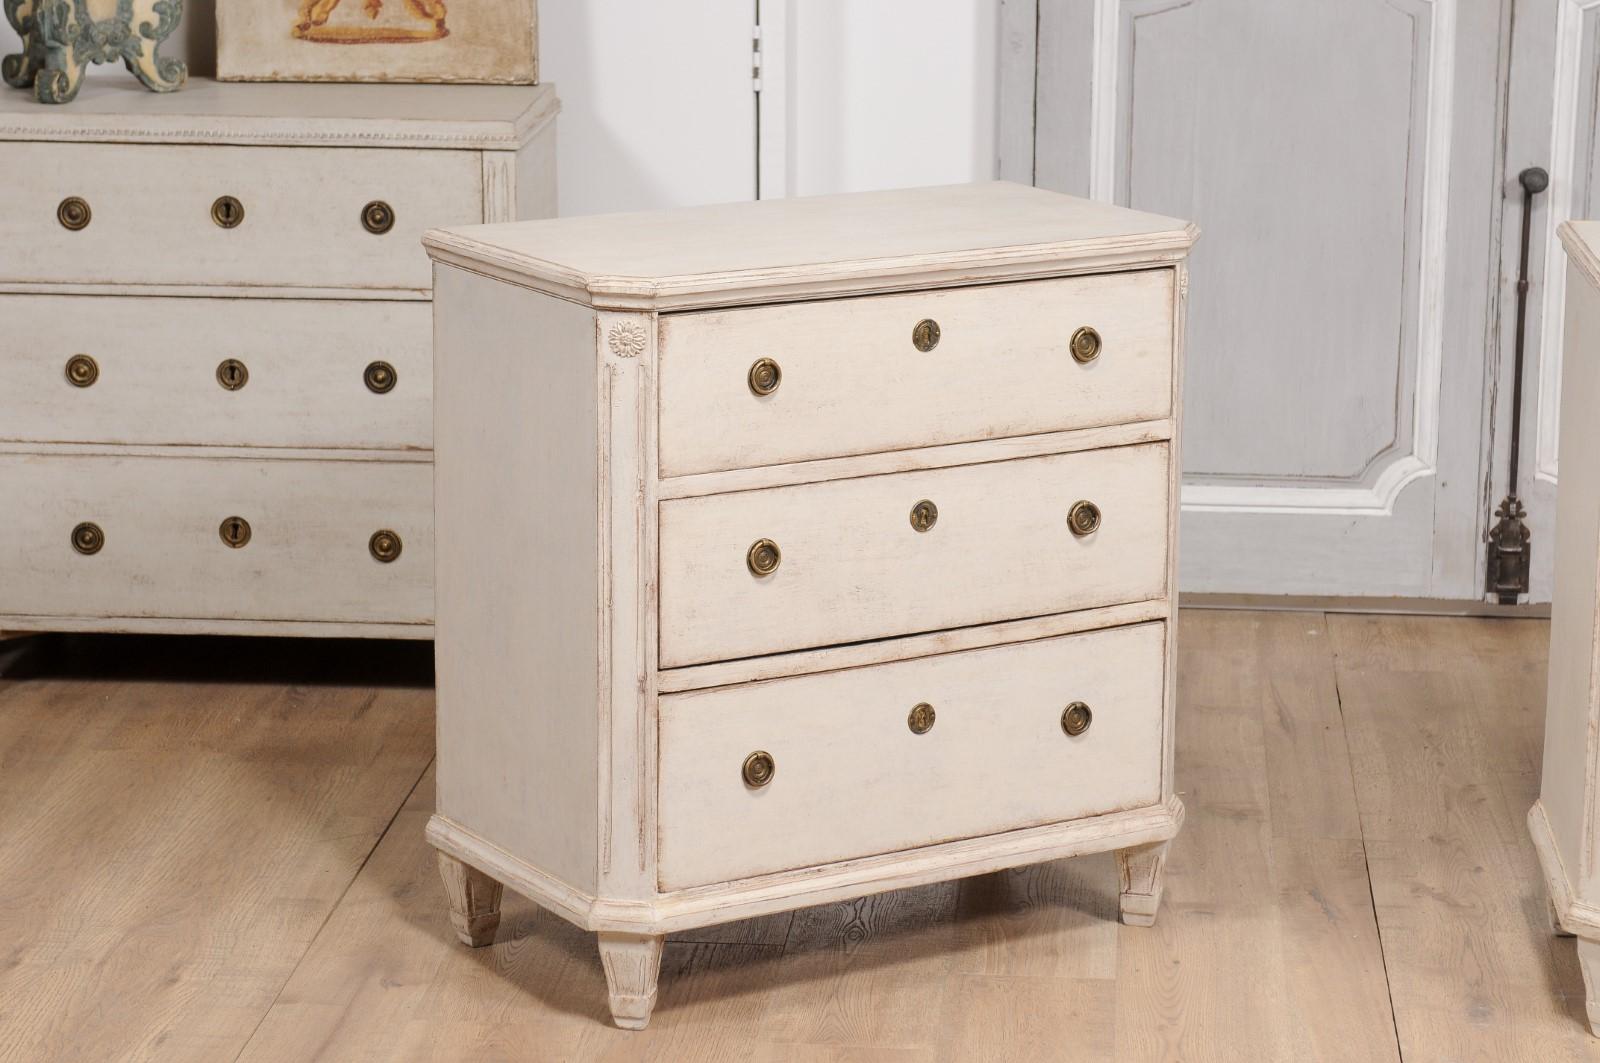 19th Century Swedish Gustavian Style Painted Three-Drawer Chests, a Pair In Good Condition For Sale In Atlanta, GA